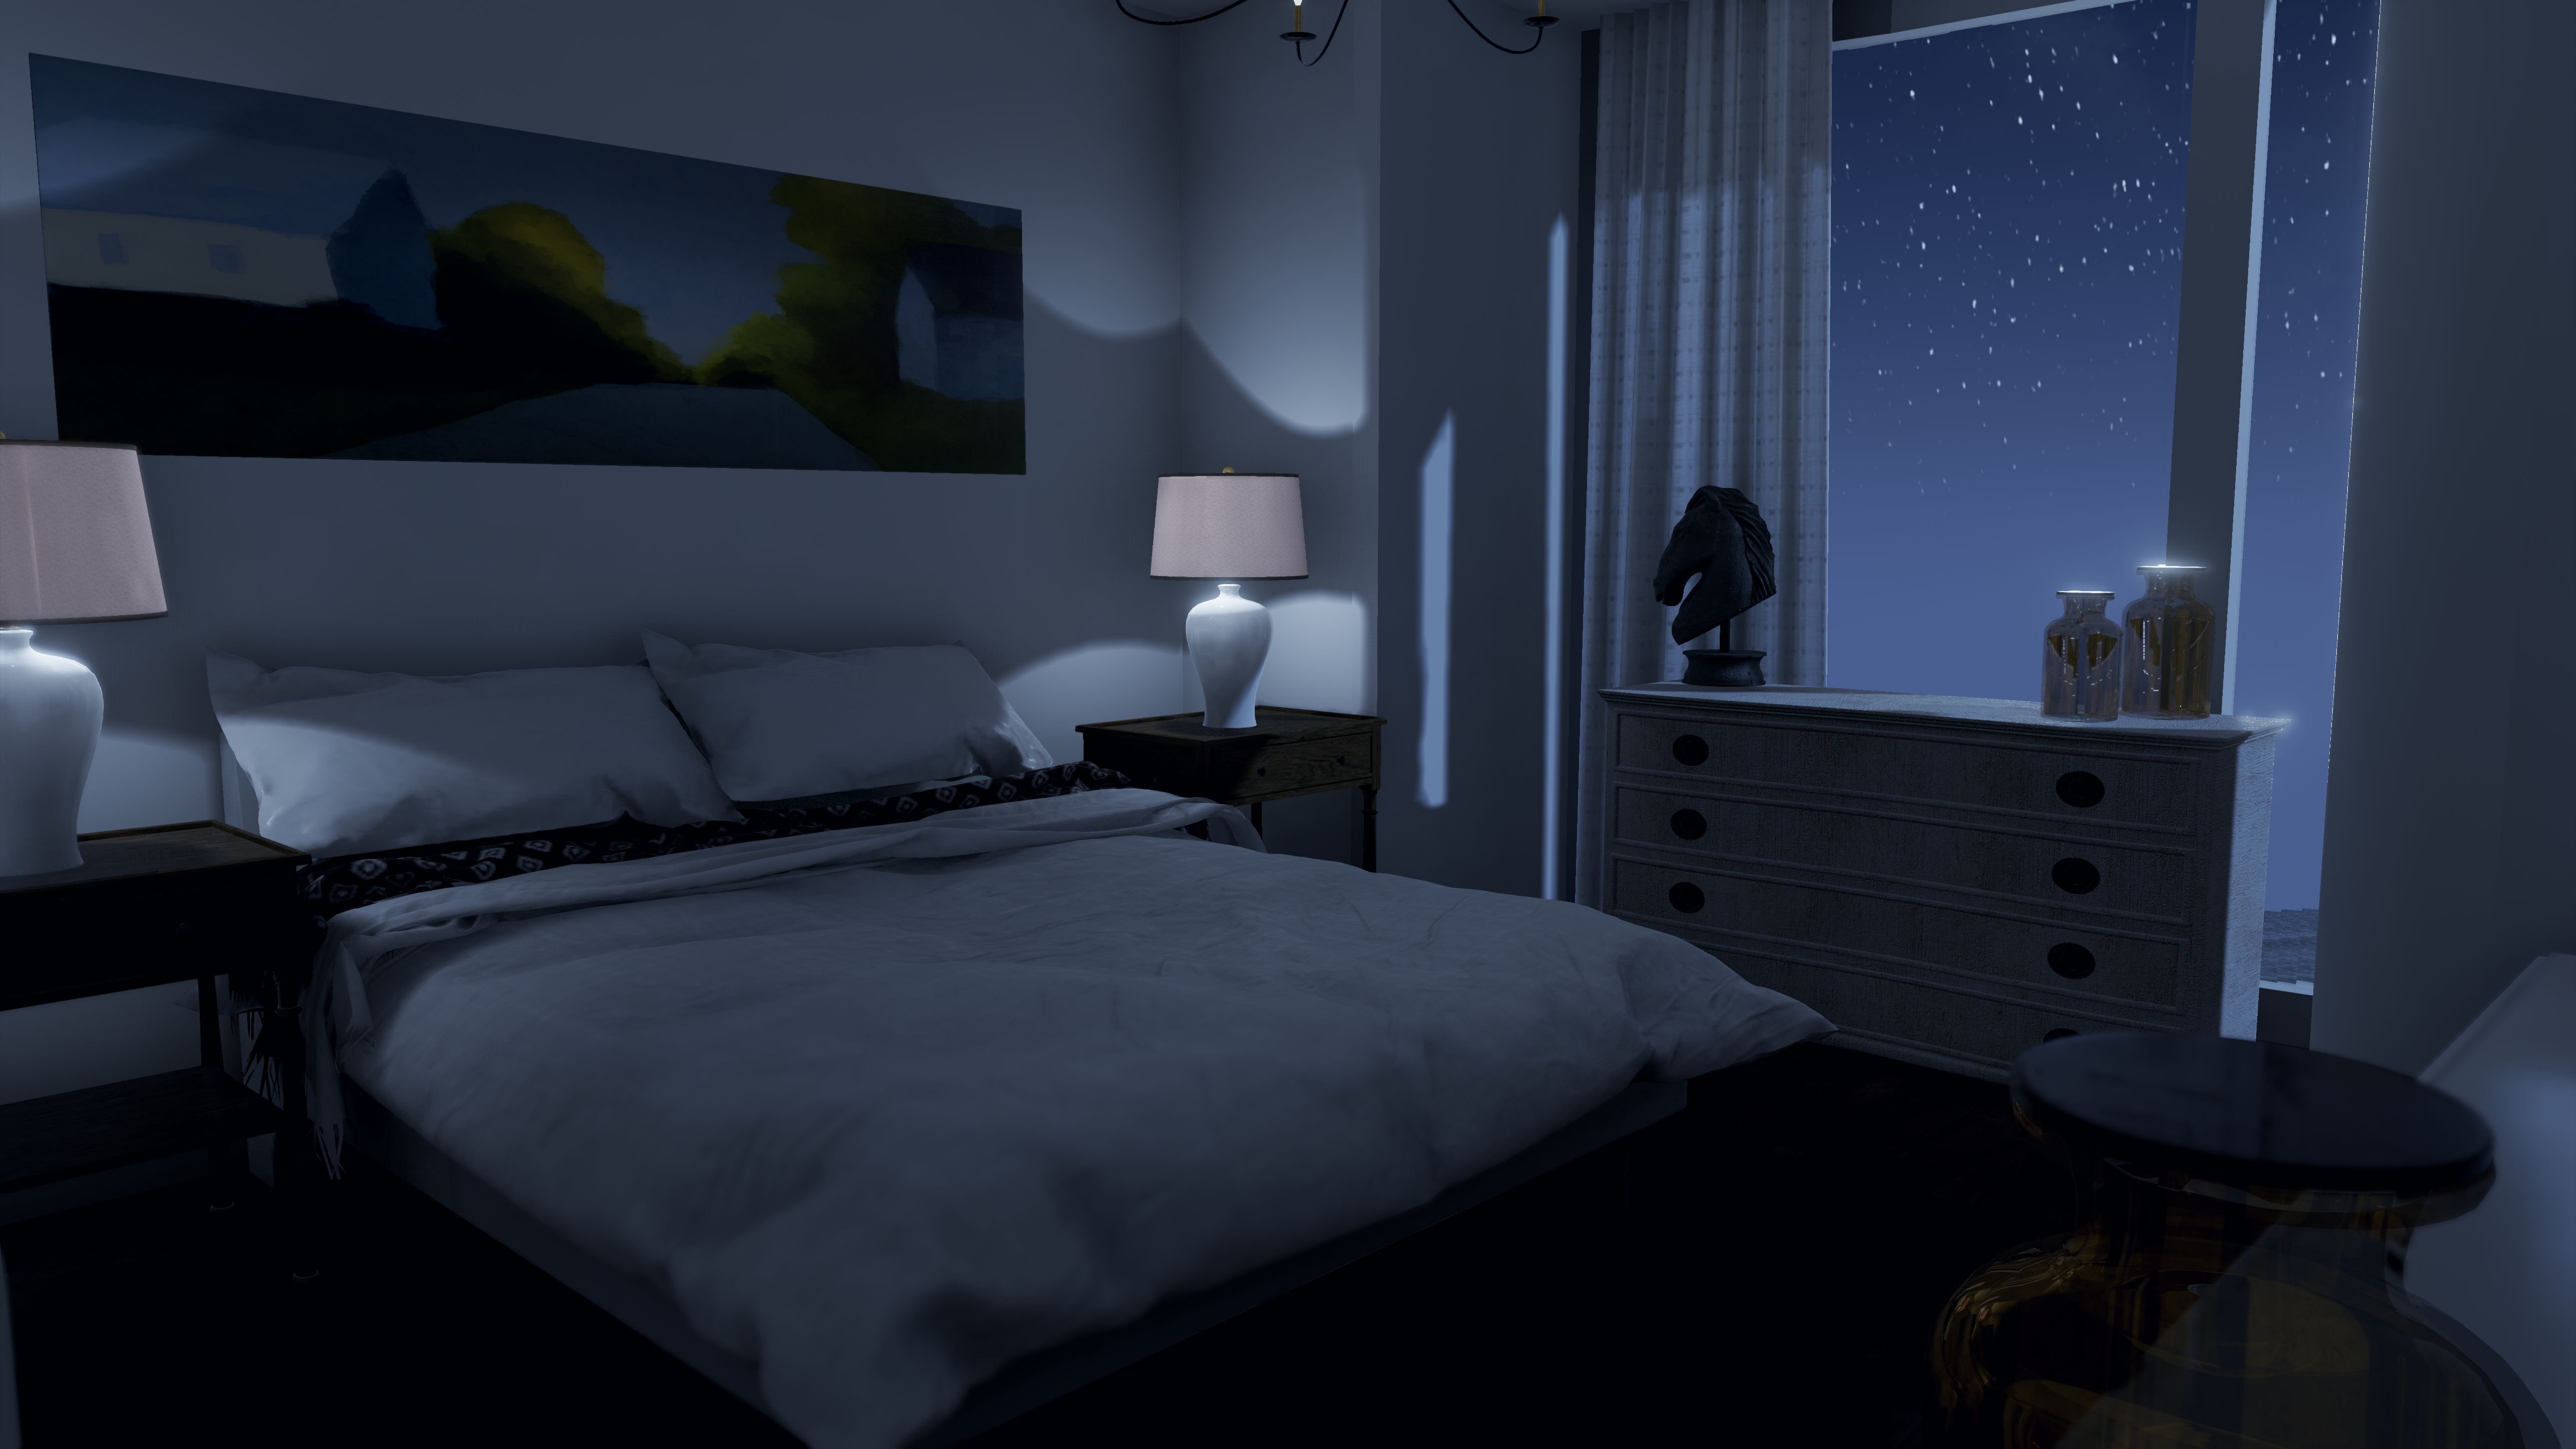 How can you transform your bedroom with 3D bedding. : The top 9 stunning designs